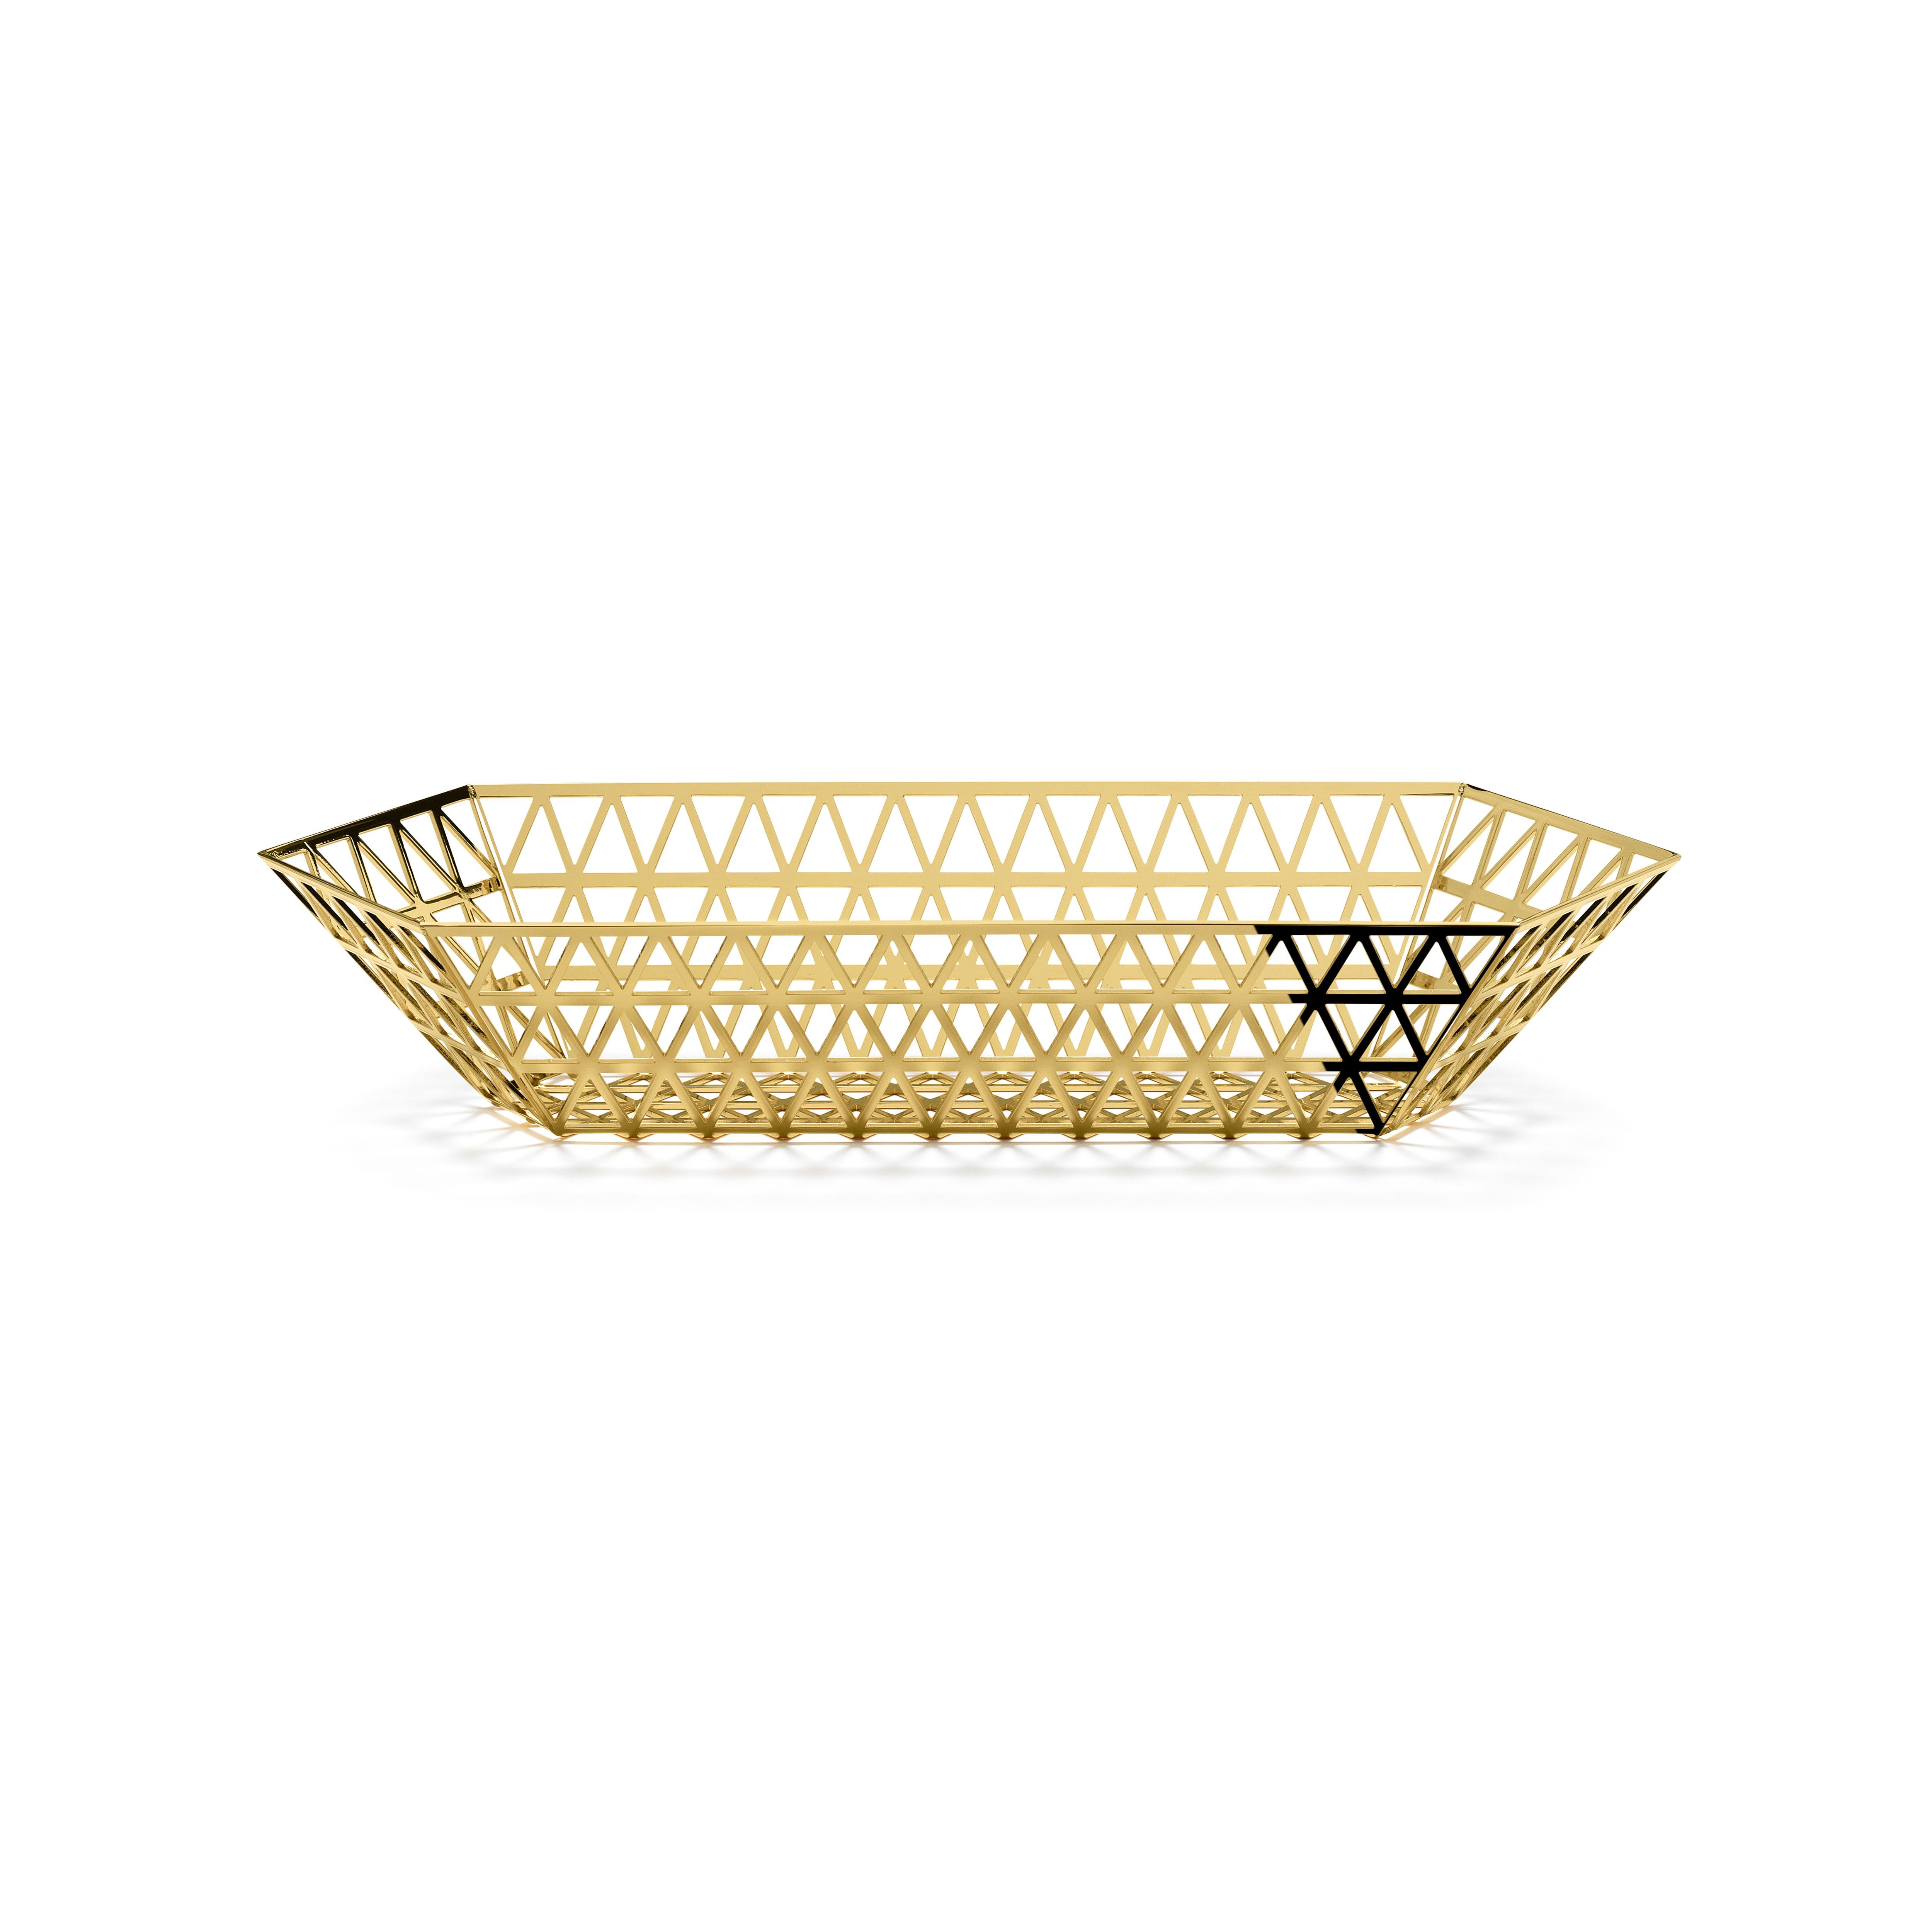 Limousine tray in stainless steel
When you look at the top view of the Tip-Top series, all the triangles have the same size. In 3D these triangles have been stretched, which creates a very surprising hexagonal structure, applied to different